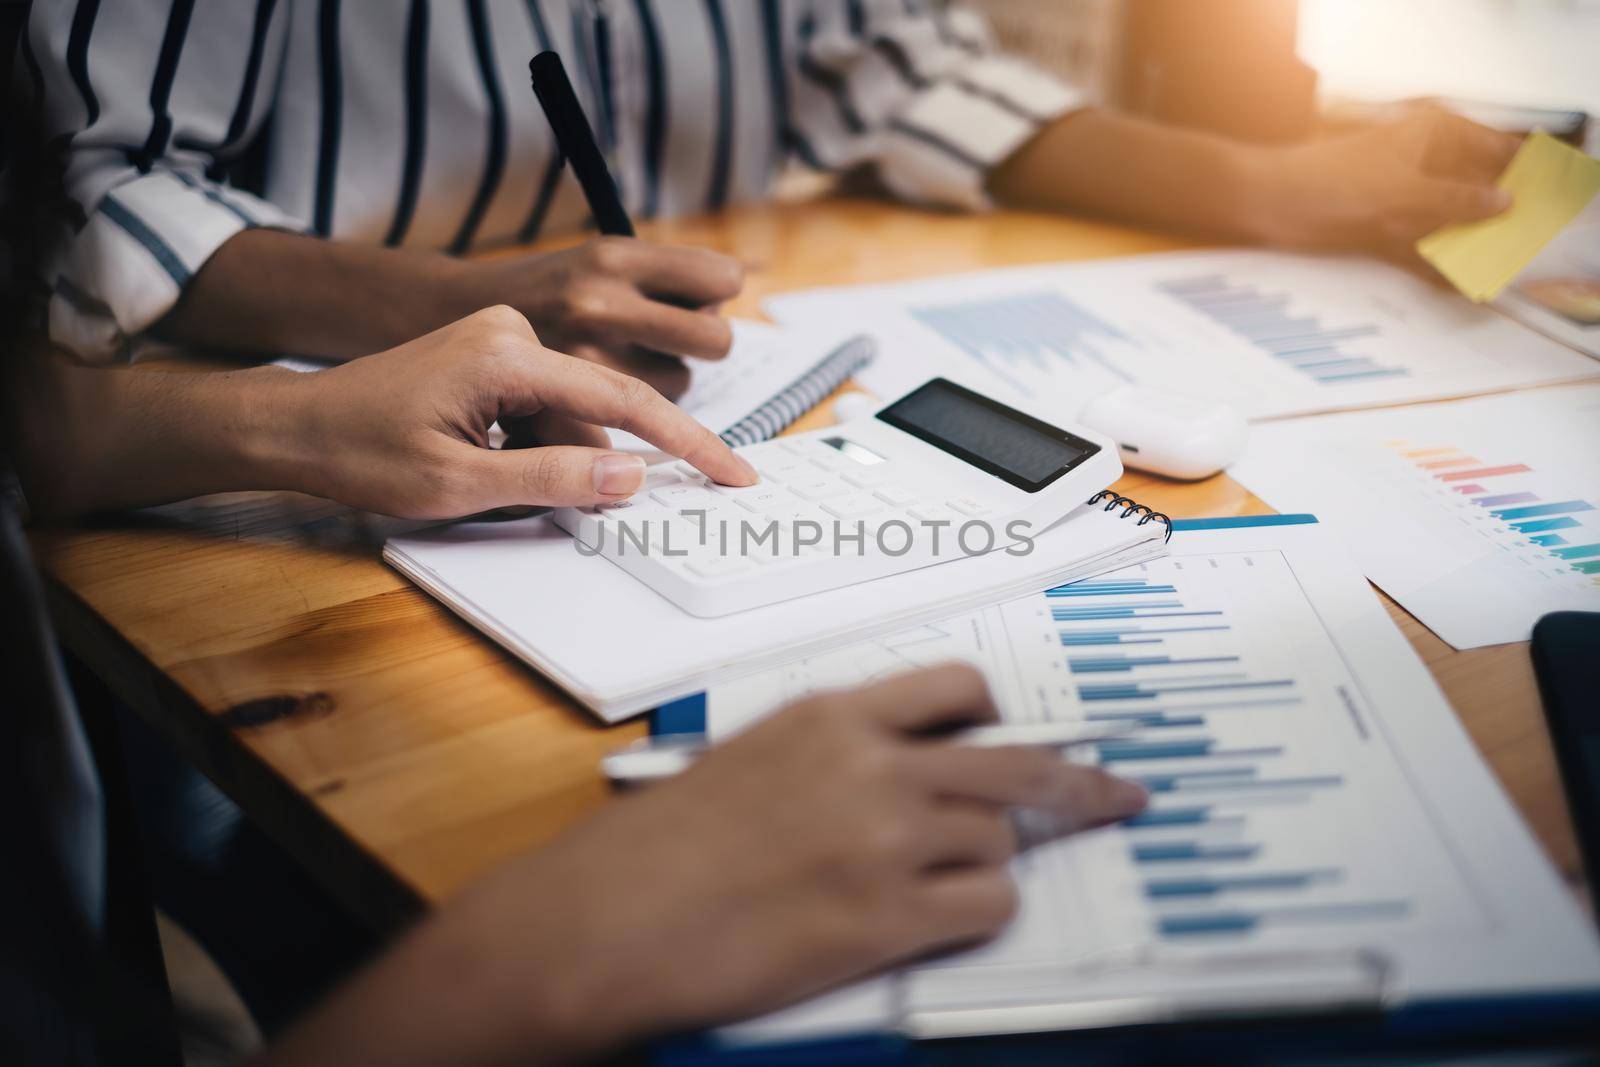 During a business meeting with colleagues, a company marketologist gives a presentation about market plan and investment and pointing at paperwork by itchaznong